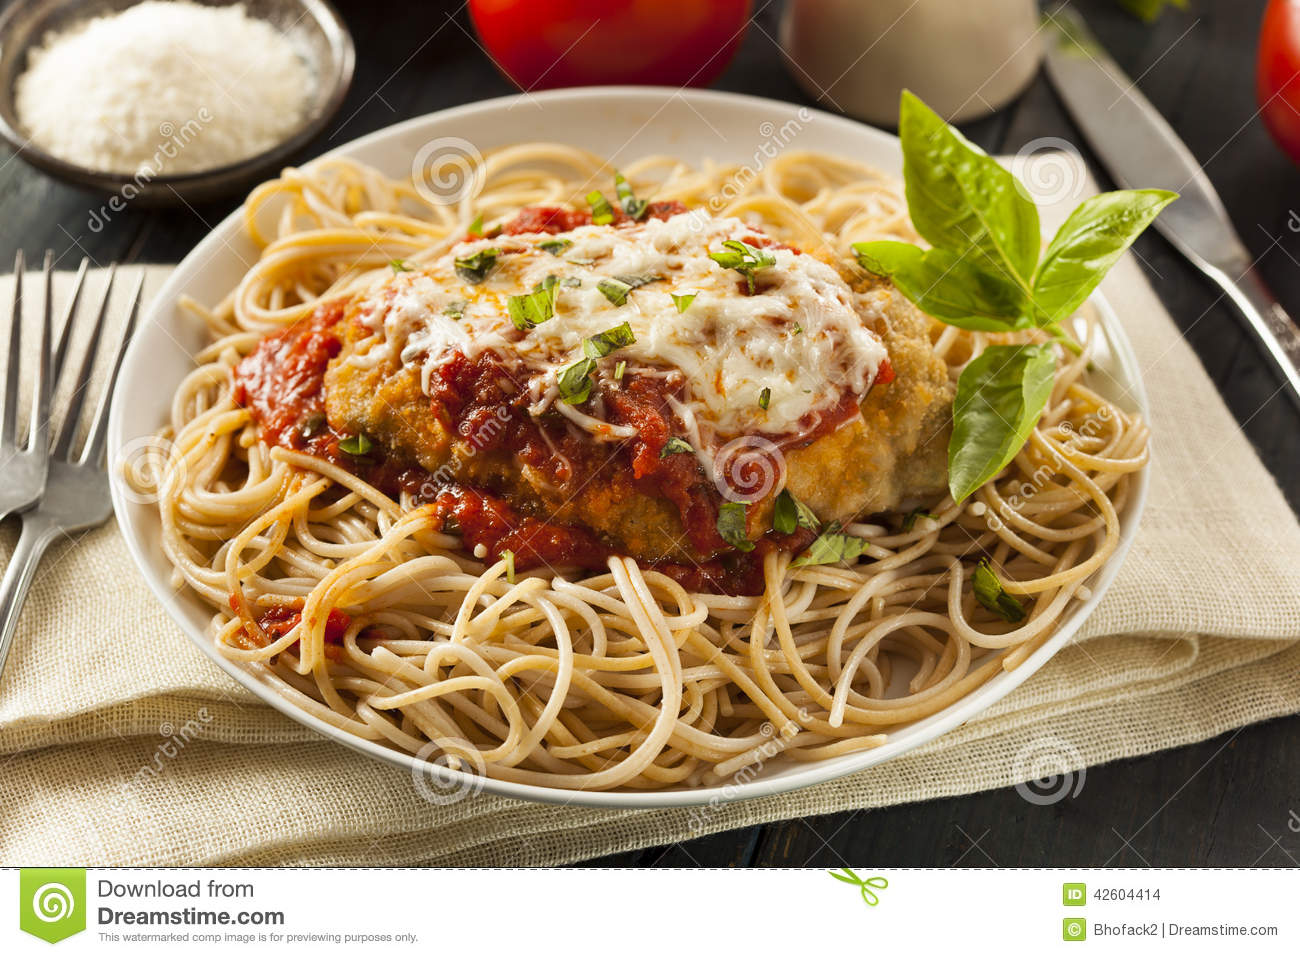 Homemade Italian Chicken Parmesan With Cheese And Sauce